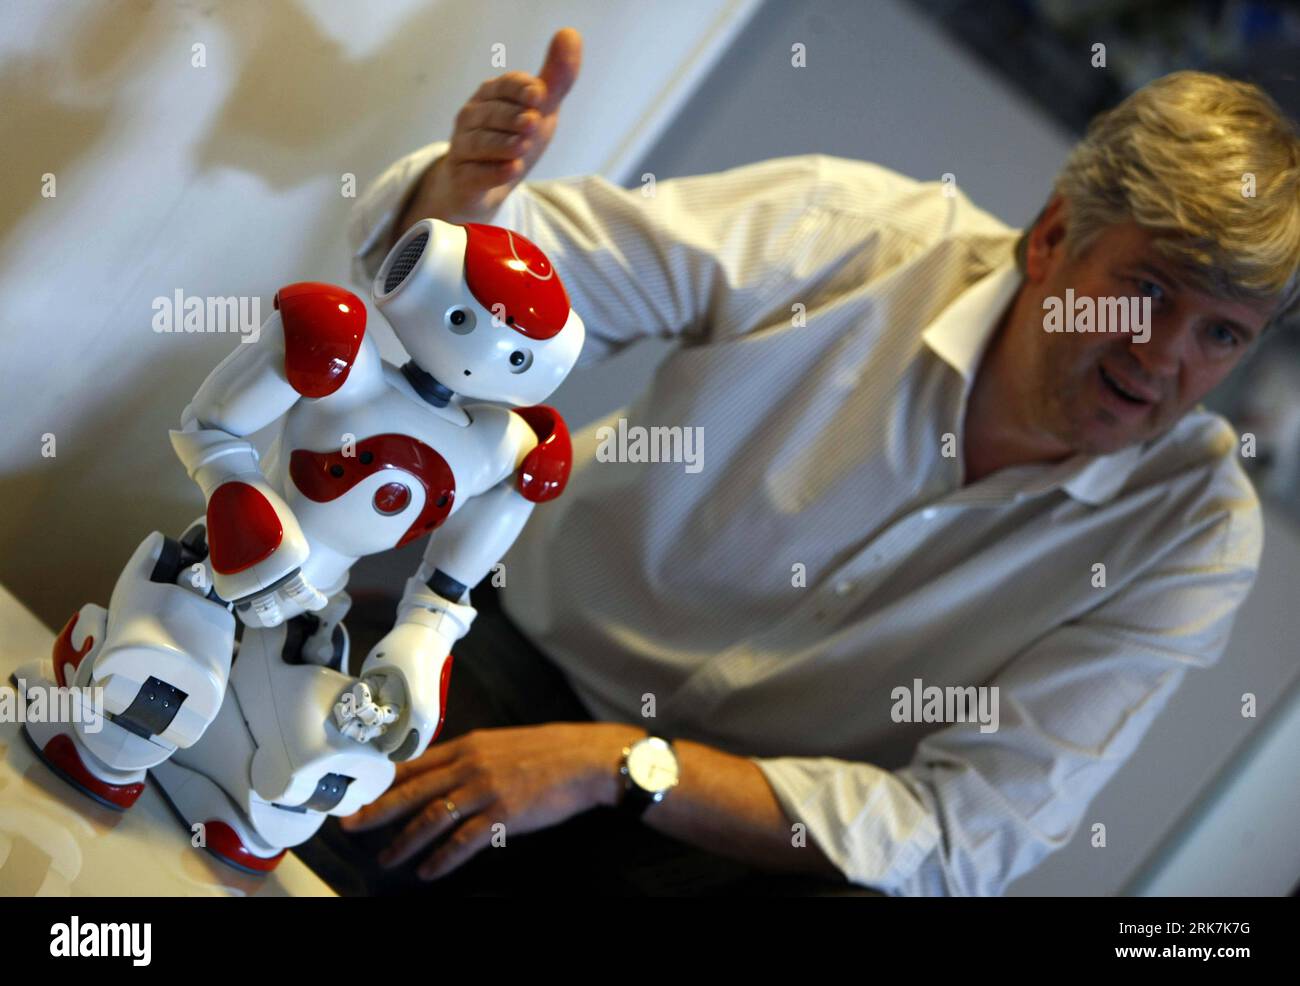 Bildnummer: 53923449  Datum: 06.04.2010  Copyright: imago/Xinhua (100407) -- PARIS, April 7, 2010 (Xinhua) -- France s Aldebaran Company President Bruno Maisonnier displays a robot named Nao in Paris April 6, 2010. The robot developed by Aldebaran can speak fluent English, French and Chinese. It will be displayed at the Shanghai World Expo as the mascot of French Pavilion. (Xinhua/Zhang Yuwei) (dyw) (1)FRANCE-PARIS-ROBOT-SHANGHAI WORLD EXPO PUBLICATIONxNOTxINxCHN Gesellschaft Wirtschaft Weltausstellung Roboter kbdig xub 2010 quer o0 People    Bildnummer 53923449 Date 06 04 2010 Copyright Imago Stock Photo